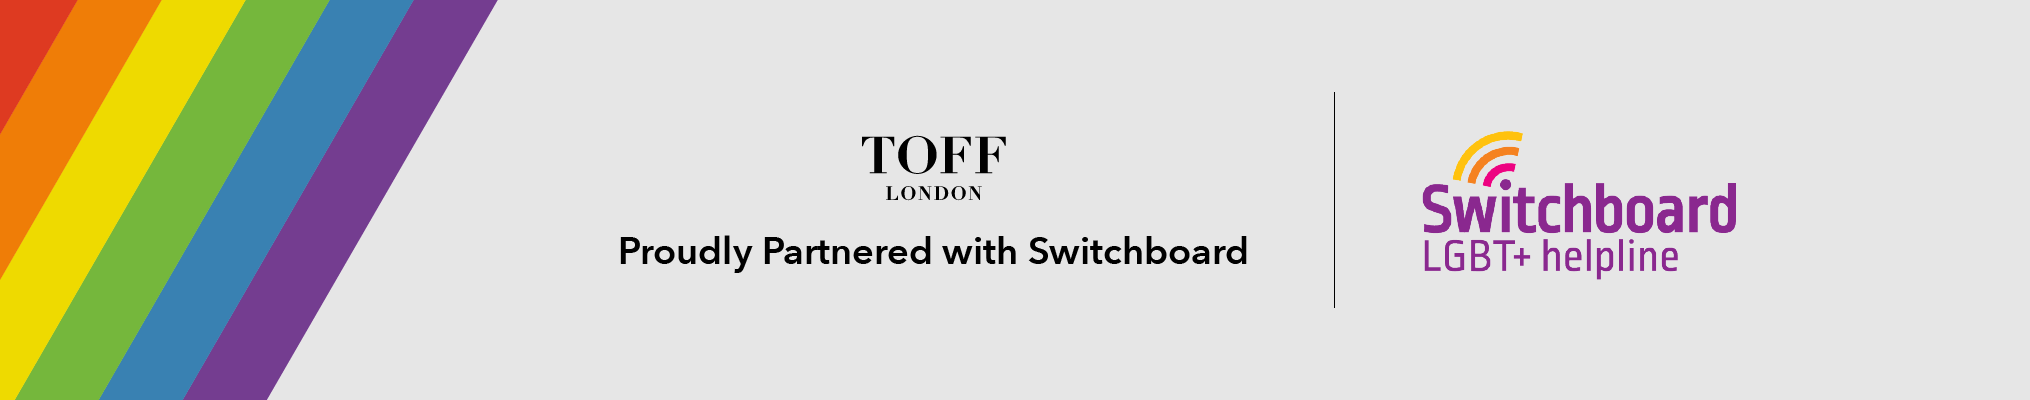 switchboard toff london banner